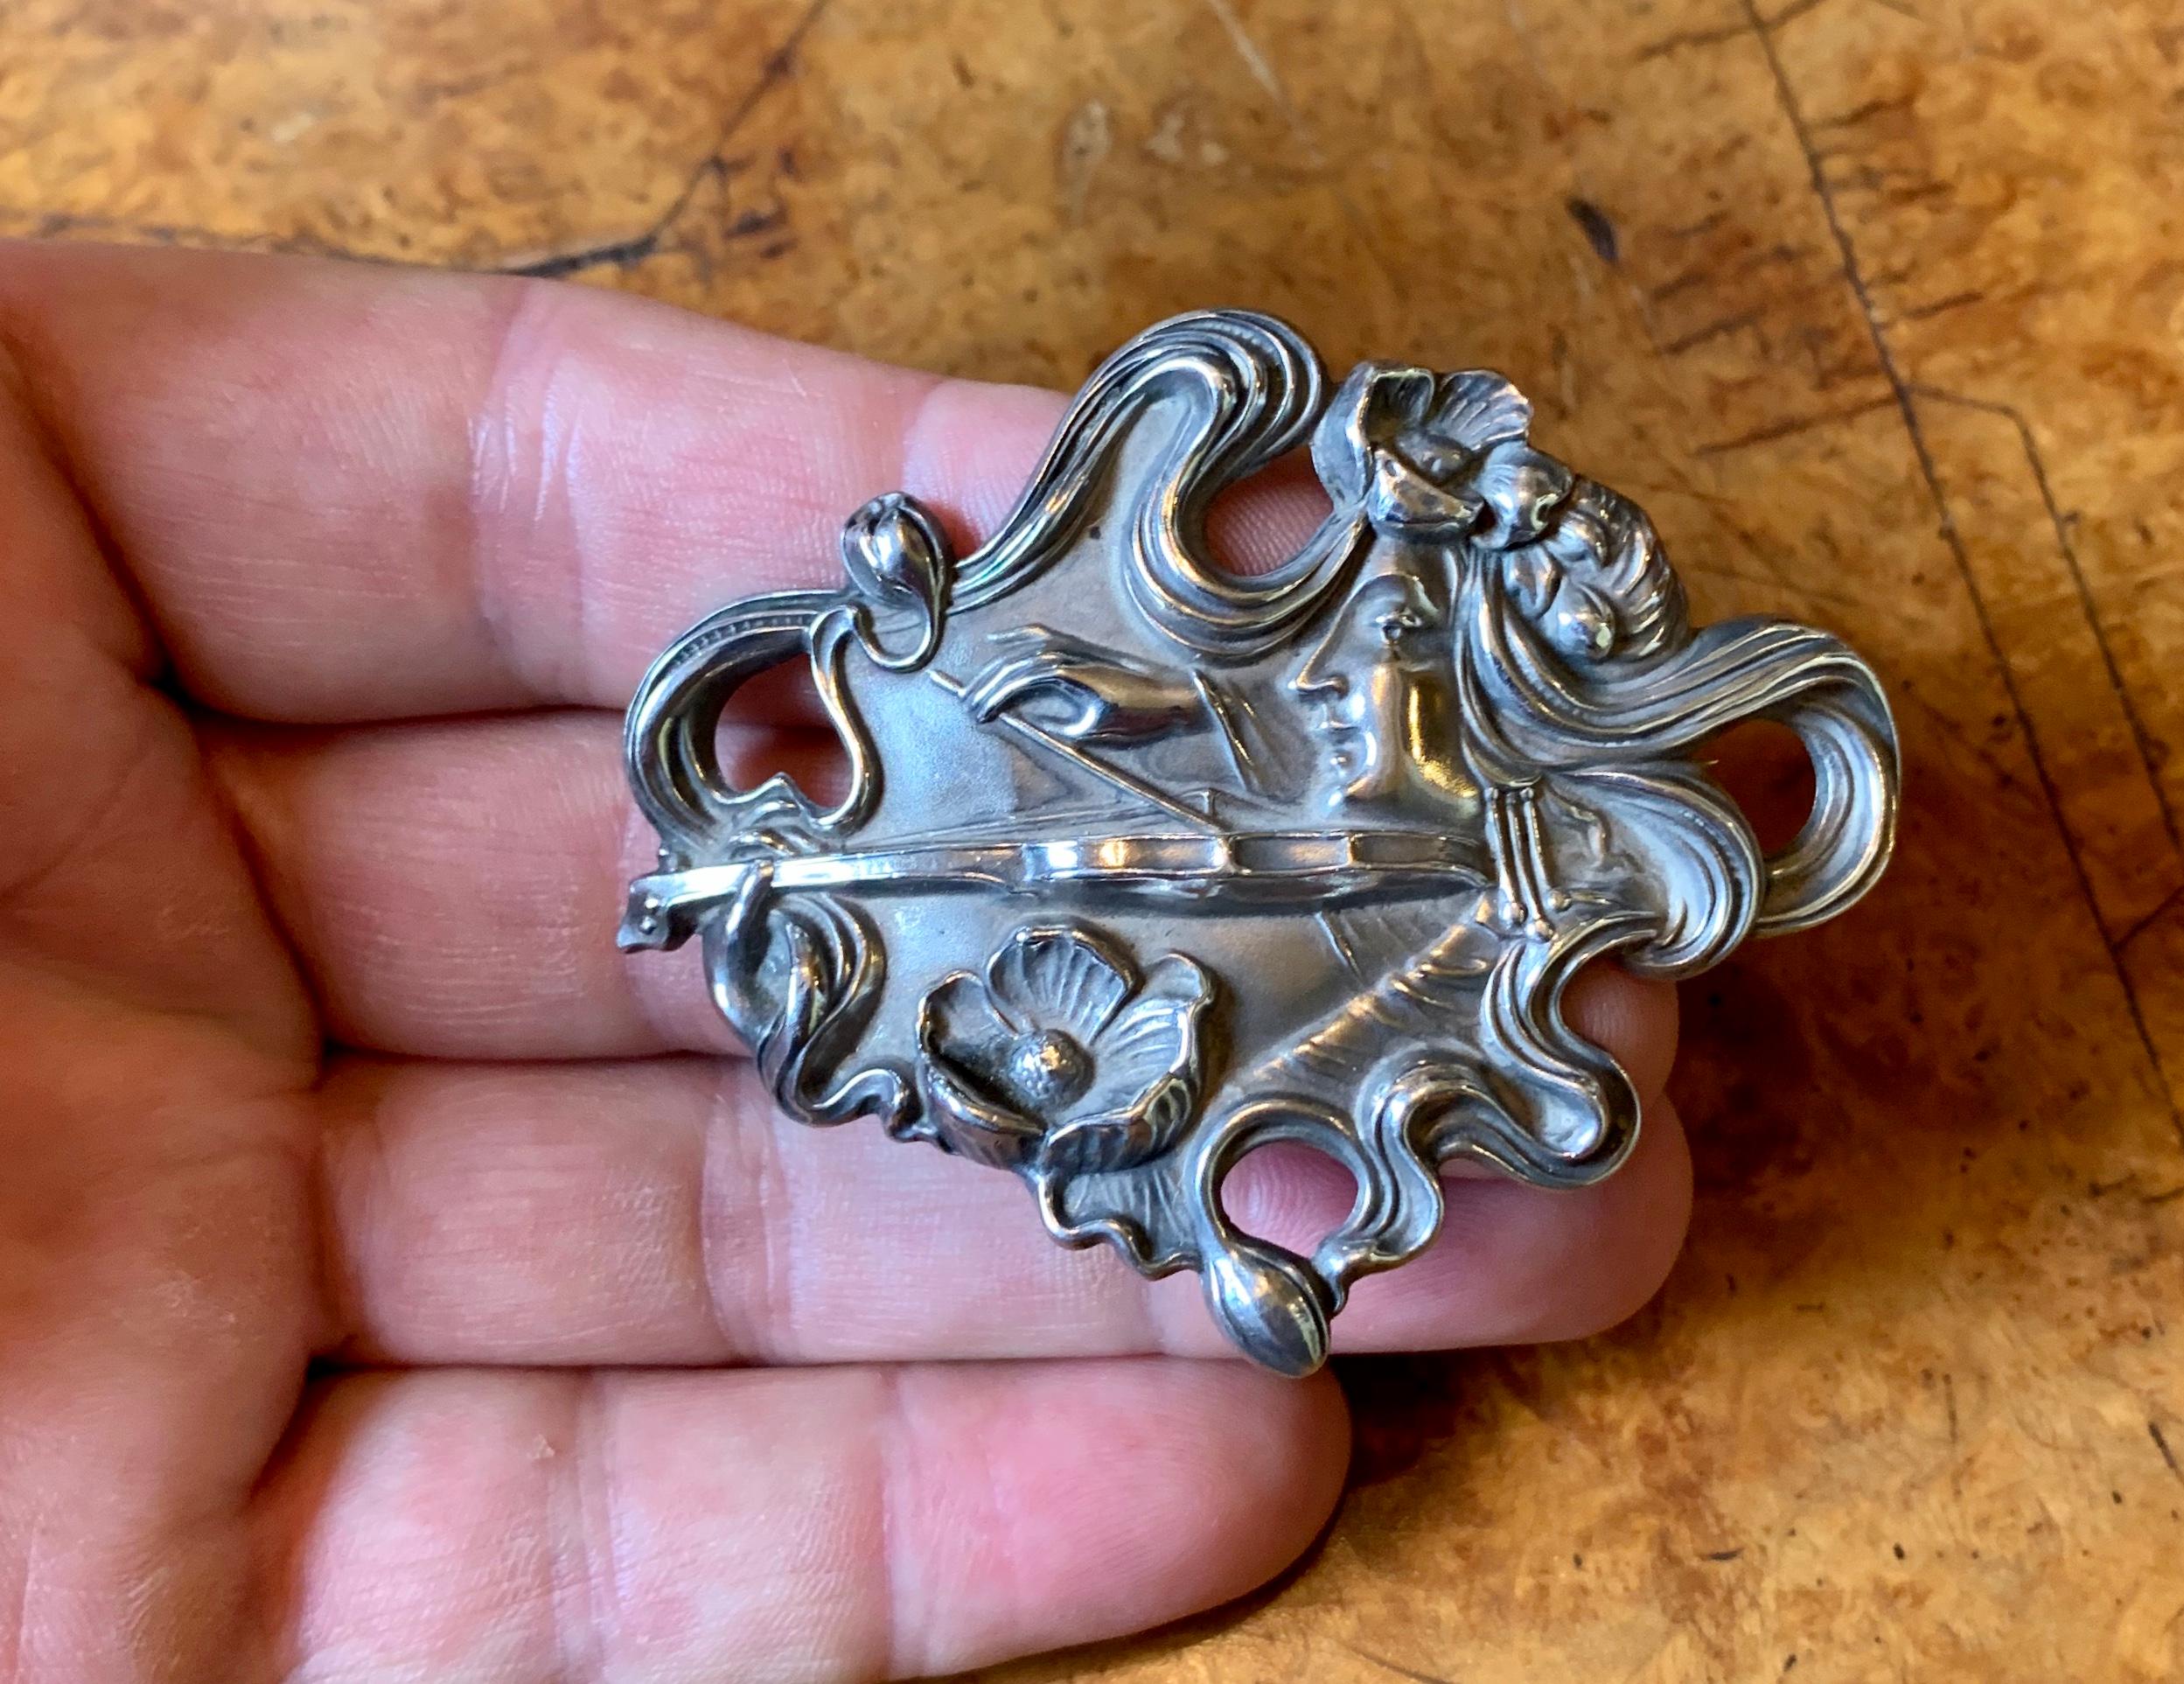 This is a museum quality Art Nouveau Brooch in Sterling Silver depicting a woman musician playing a violin or viola. This rare and extraordinary motif is rendered with exquisite Art Nouveau beauty.  The musician bows her violin while her hair, which